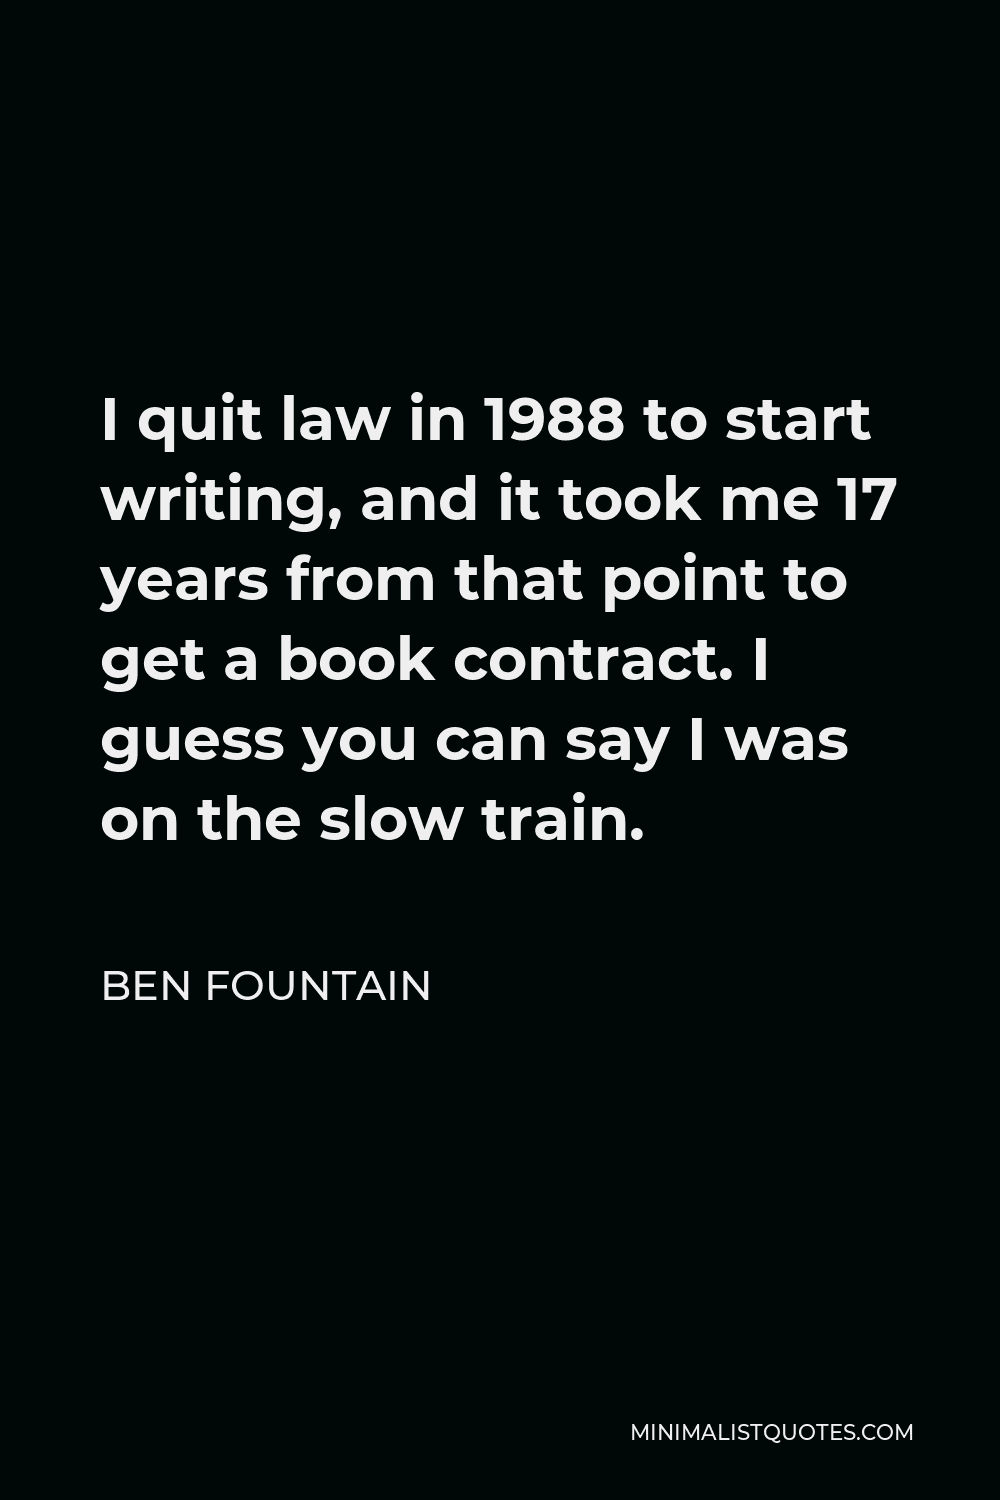 Ben Fountain Quote - I quit law in 1988 to start writing, and it took me 17 years from that point to get a book contract. I guess you can say I was on the slow train.